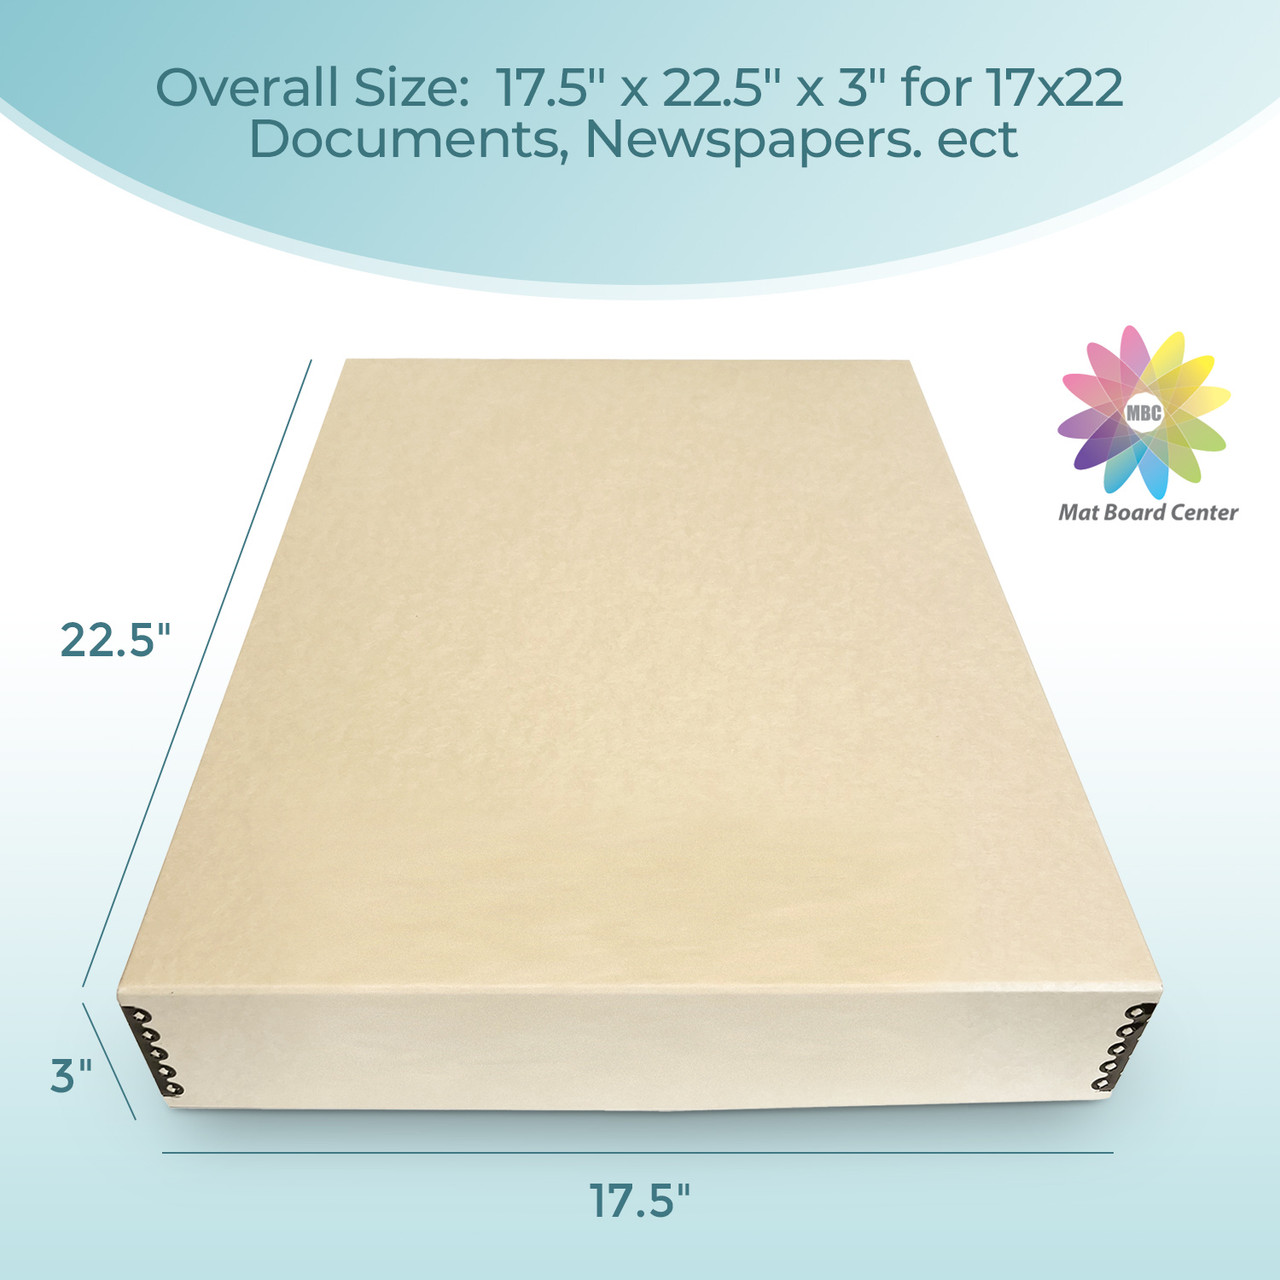 Mat Board Center, Tan Archival Photo Storage Box with 12 Acid-Free